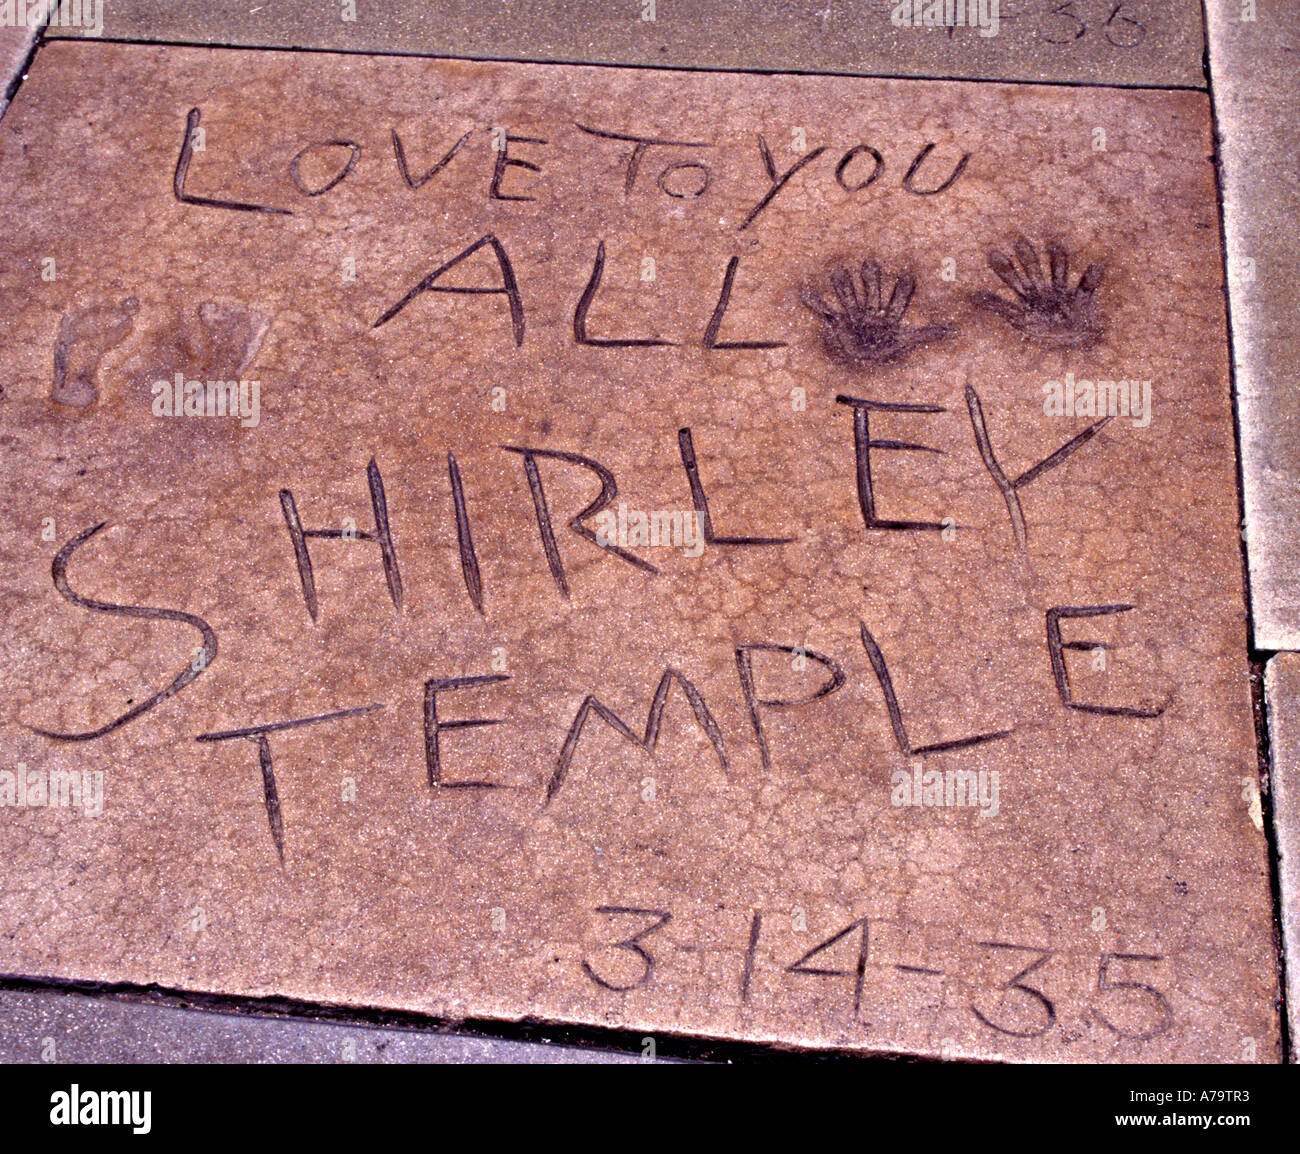 Shirley Temple Hand Fuß Drucke Pflasterung Chinese Theater in Hollywood Boulevard in Los Angeles Stockfoto